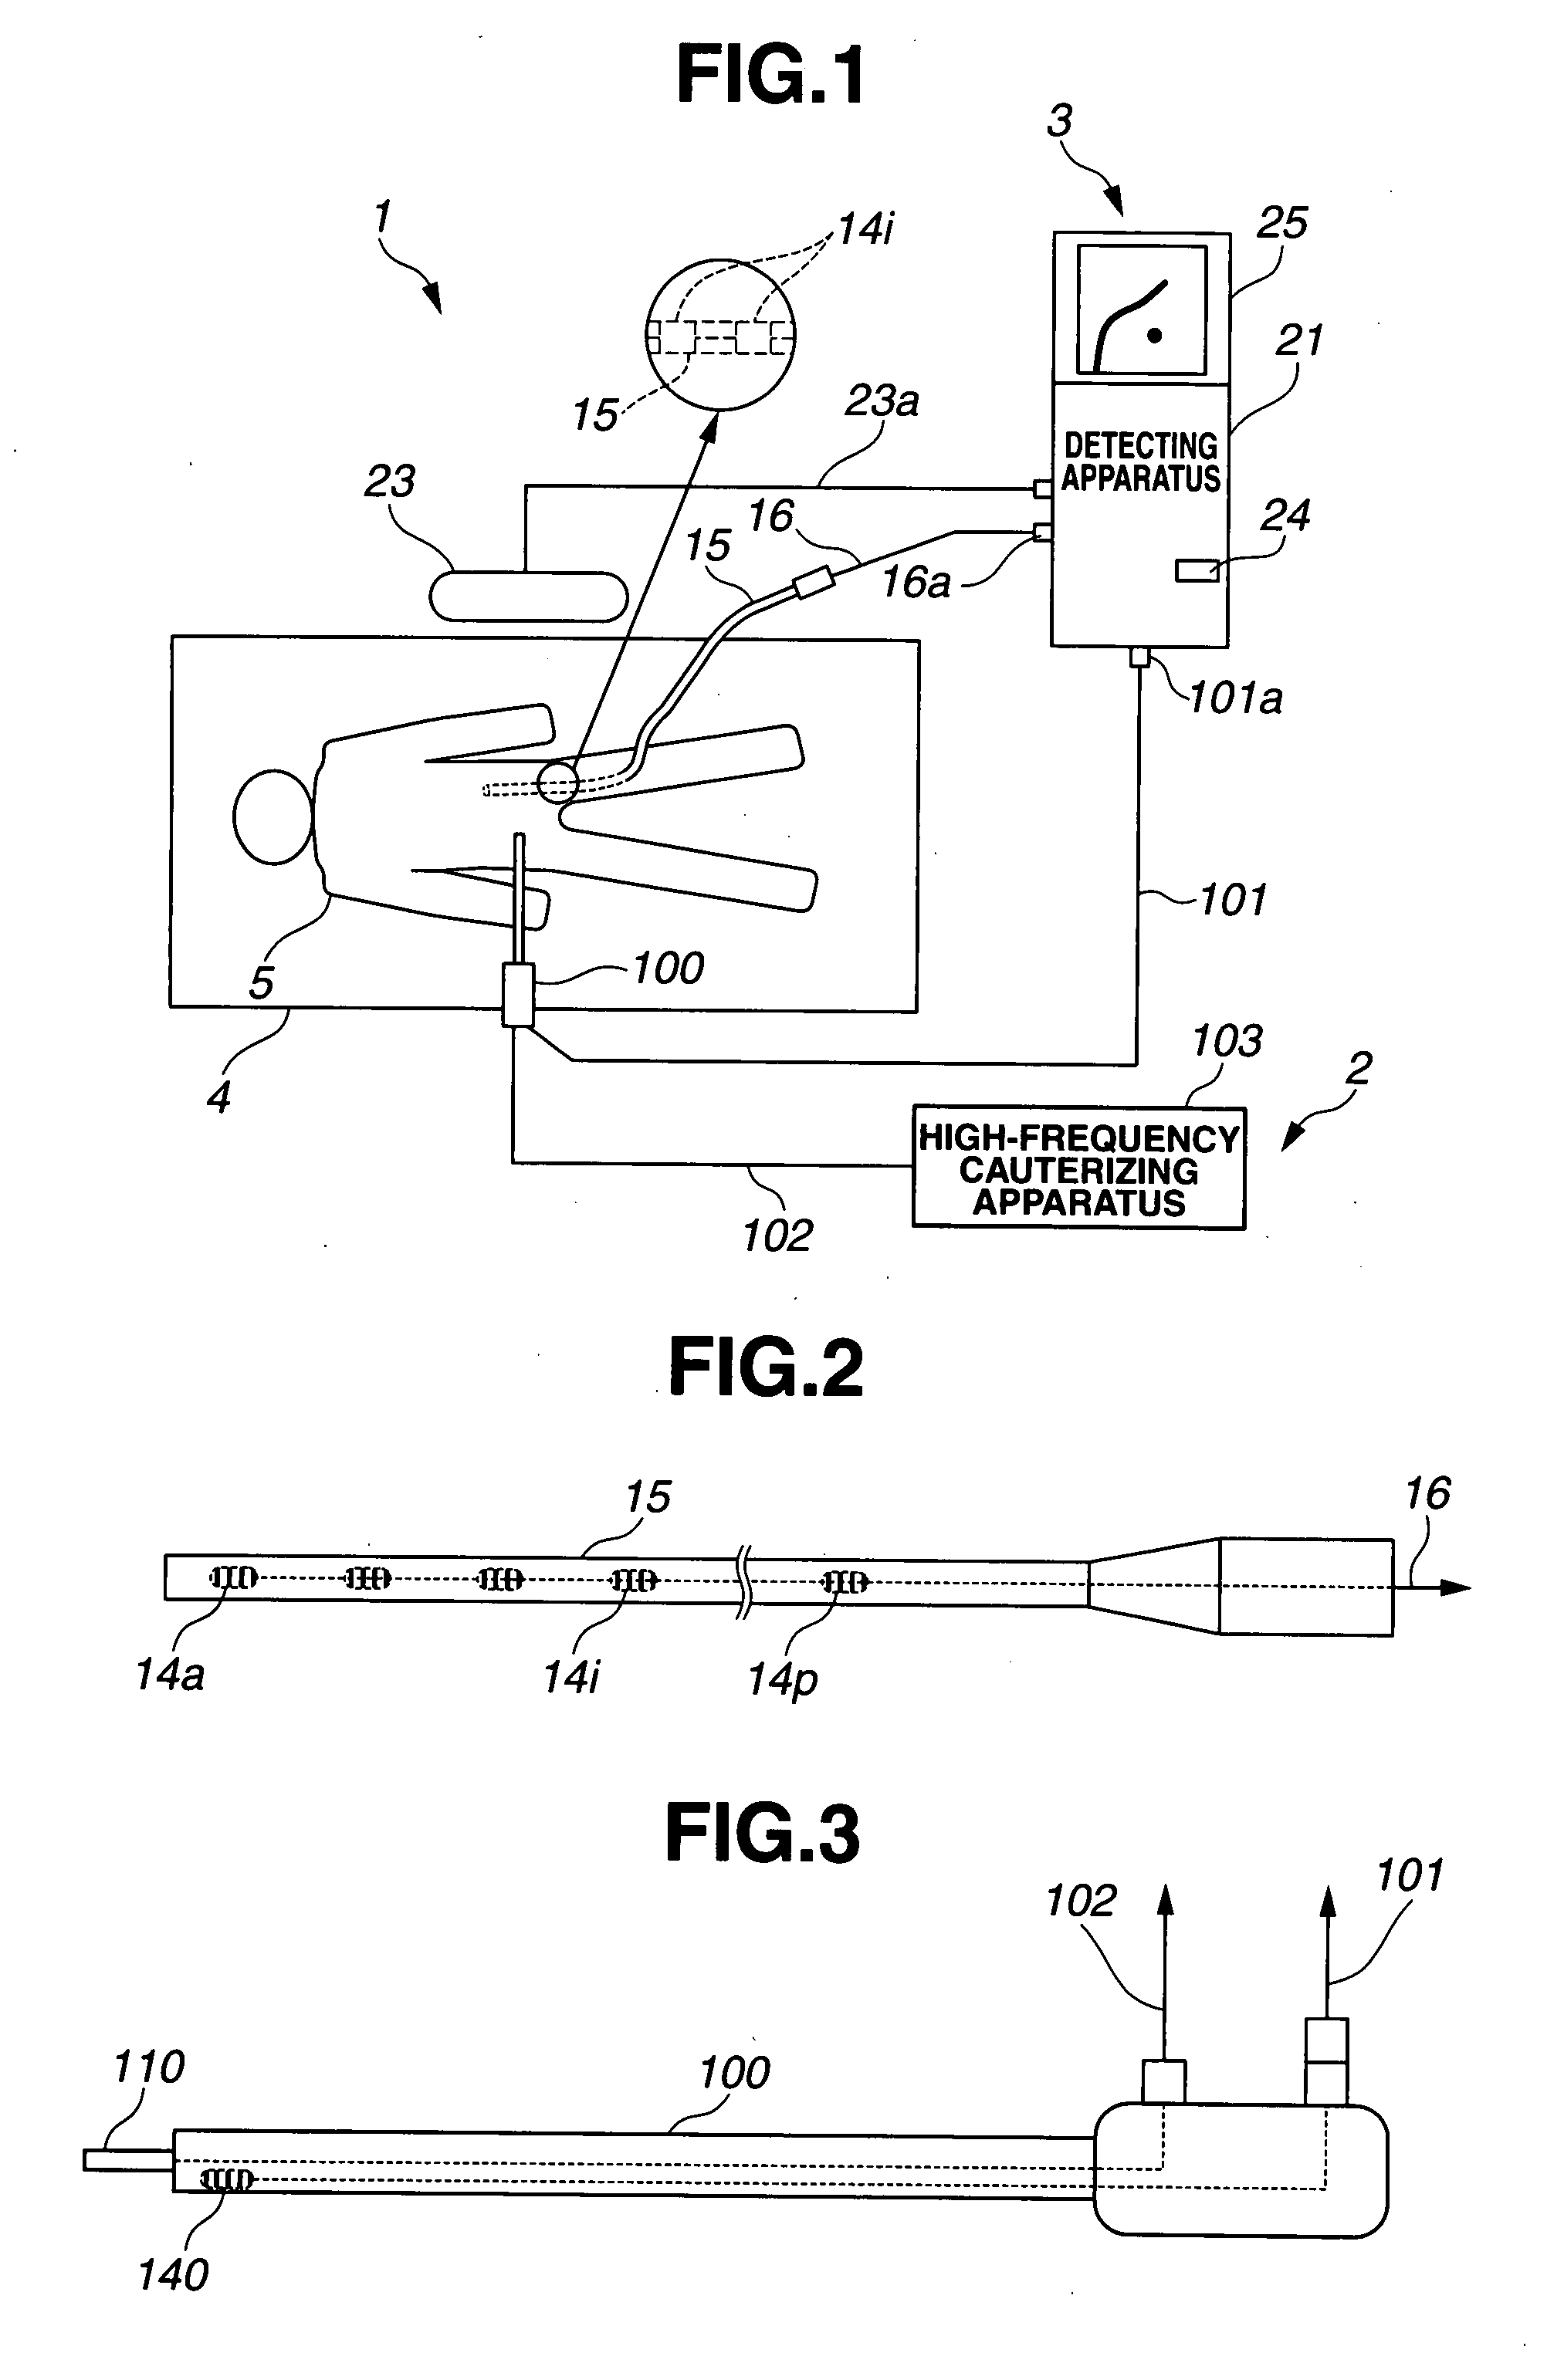 Surgery Assisting Apparatus and Treatment Assisting Apparatus